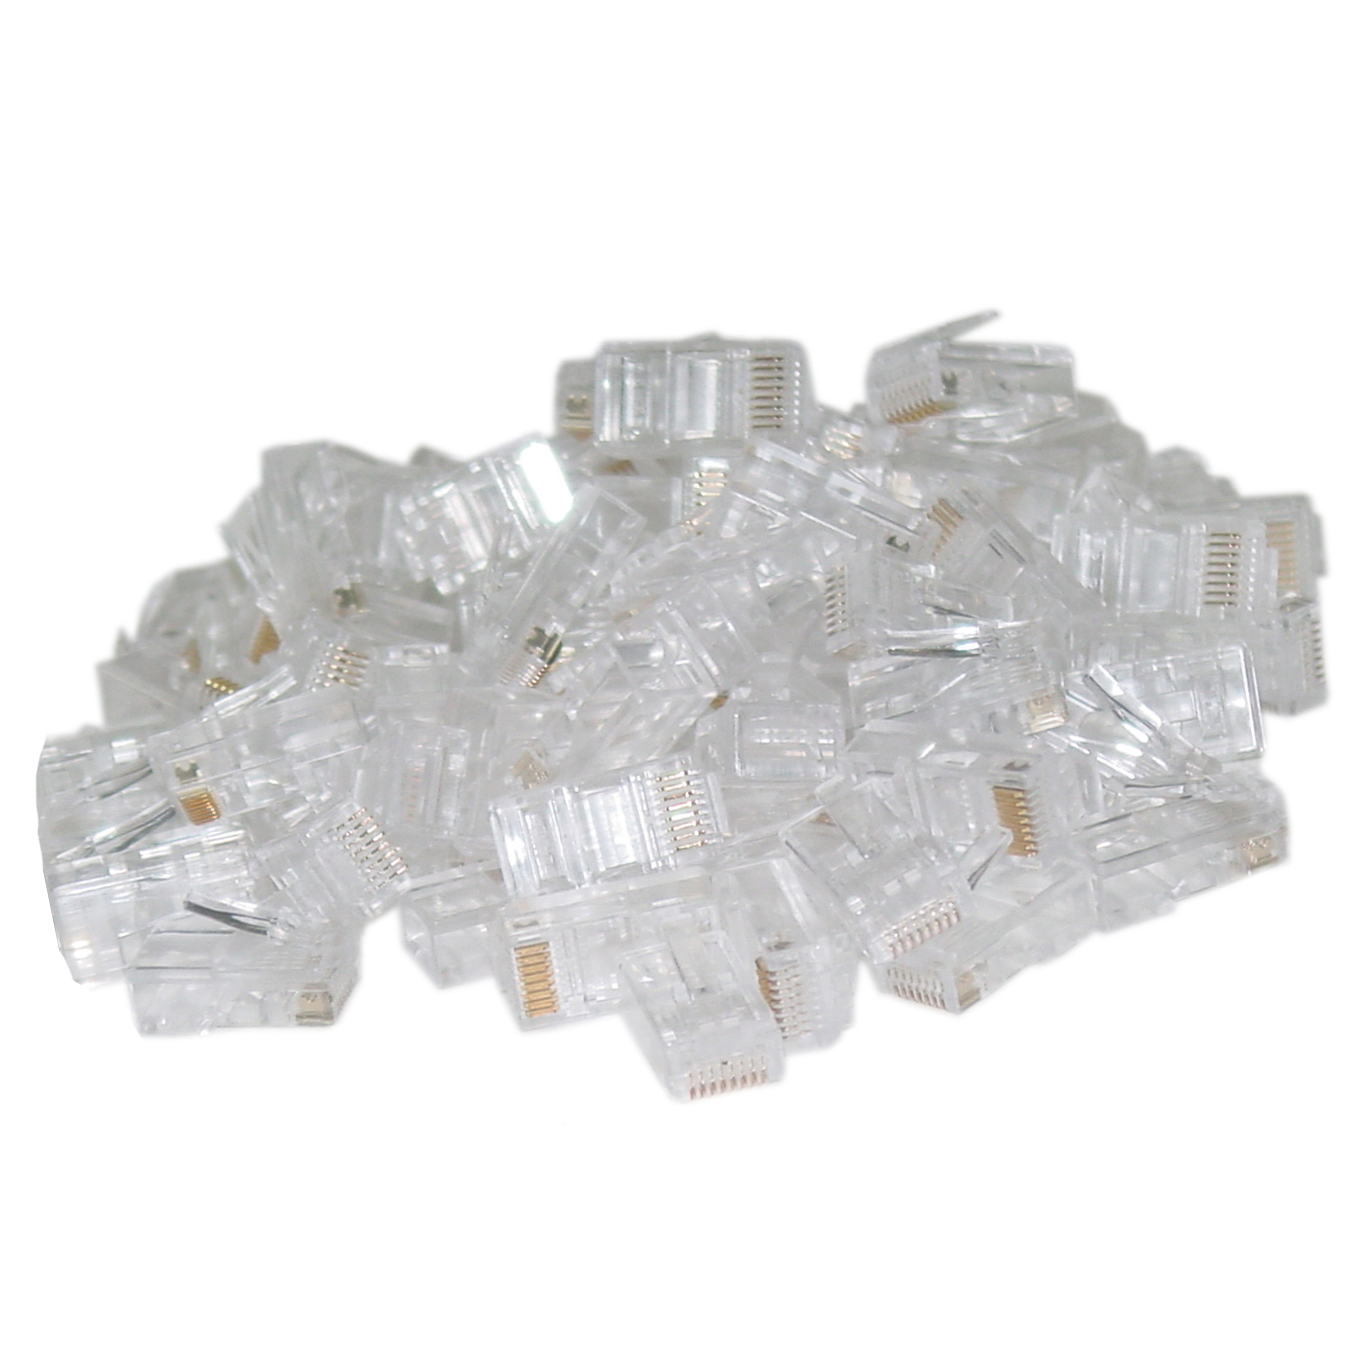 108700 - CAT6 RJ45 Crimp-On Connector Plugs for Solid Cable - Bag of 50